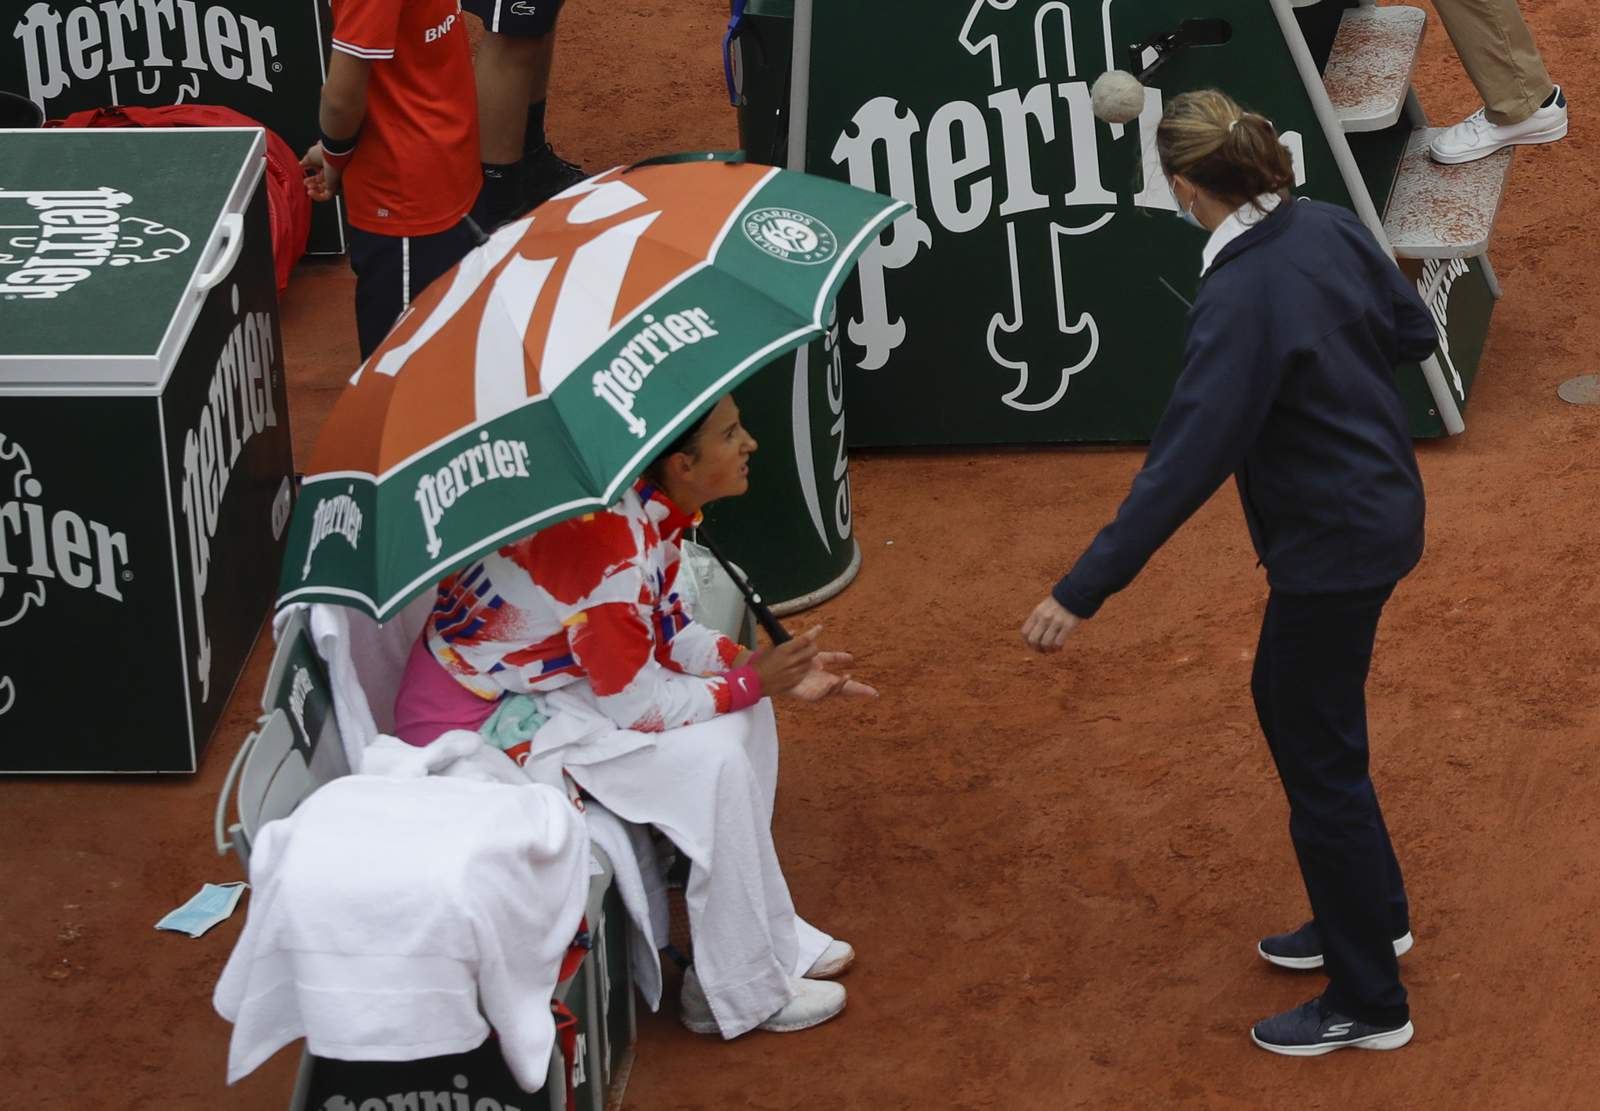 The Latest: Goffin and Sinner begin main draw at French Open